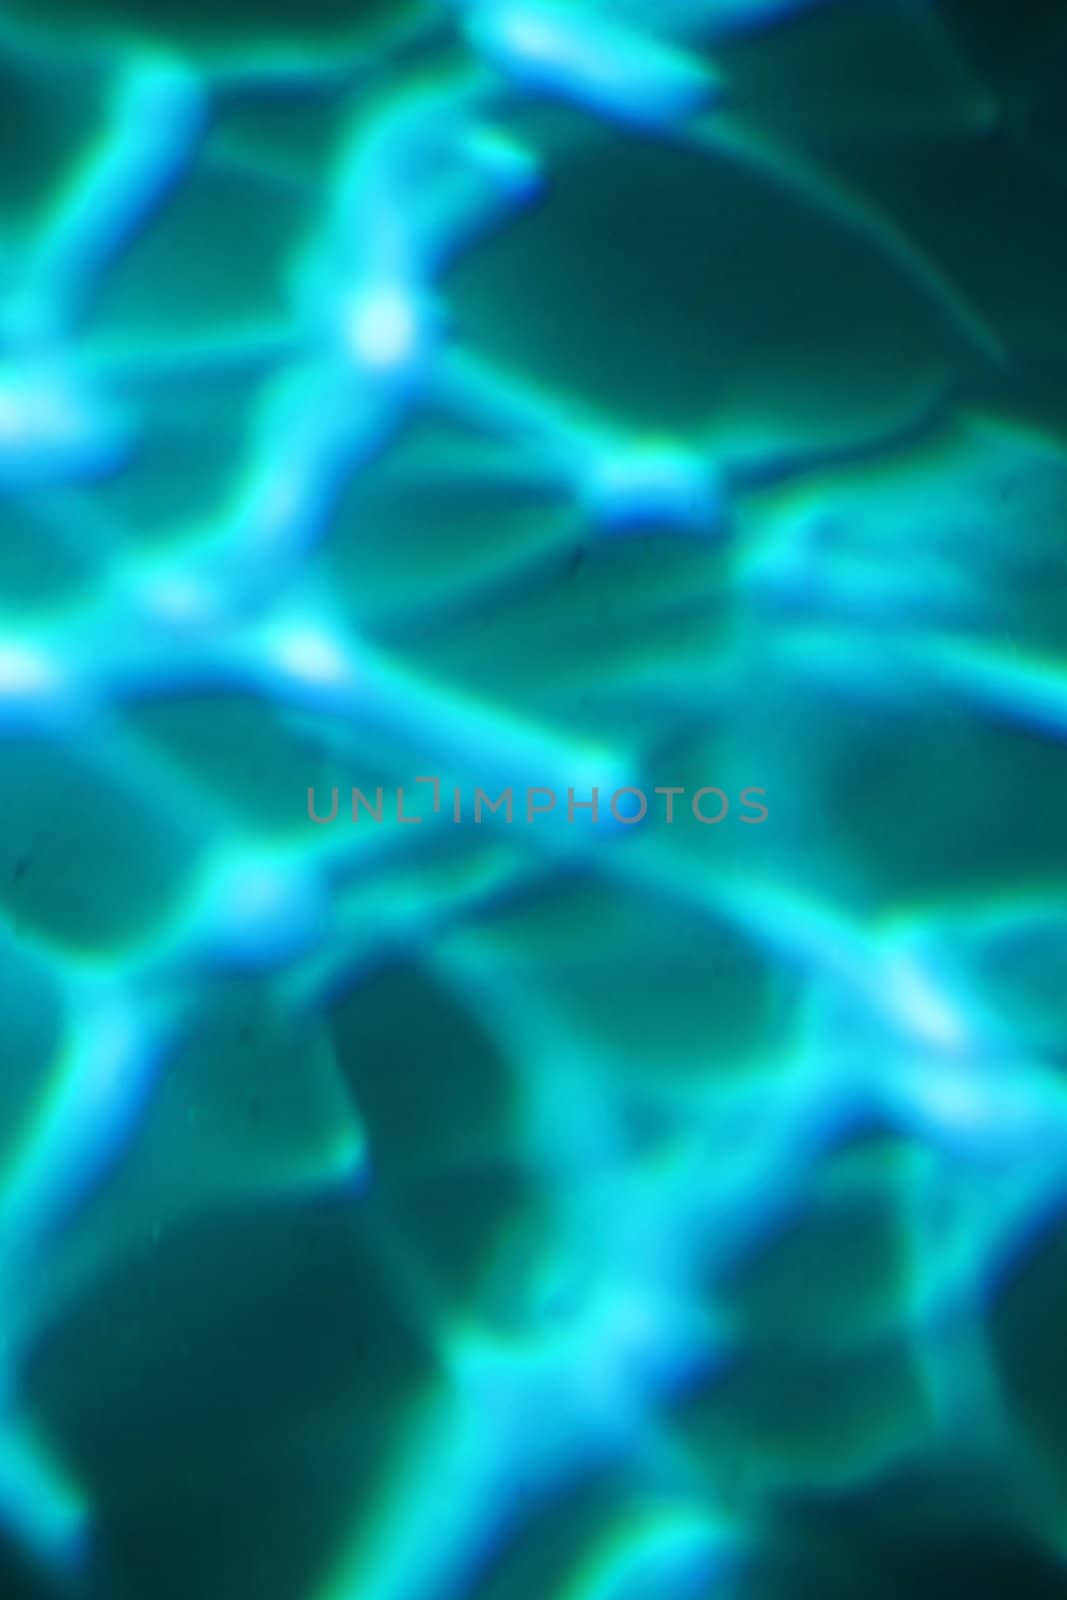 Abstract background of light shinning through blue water.